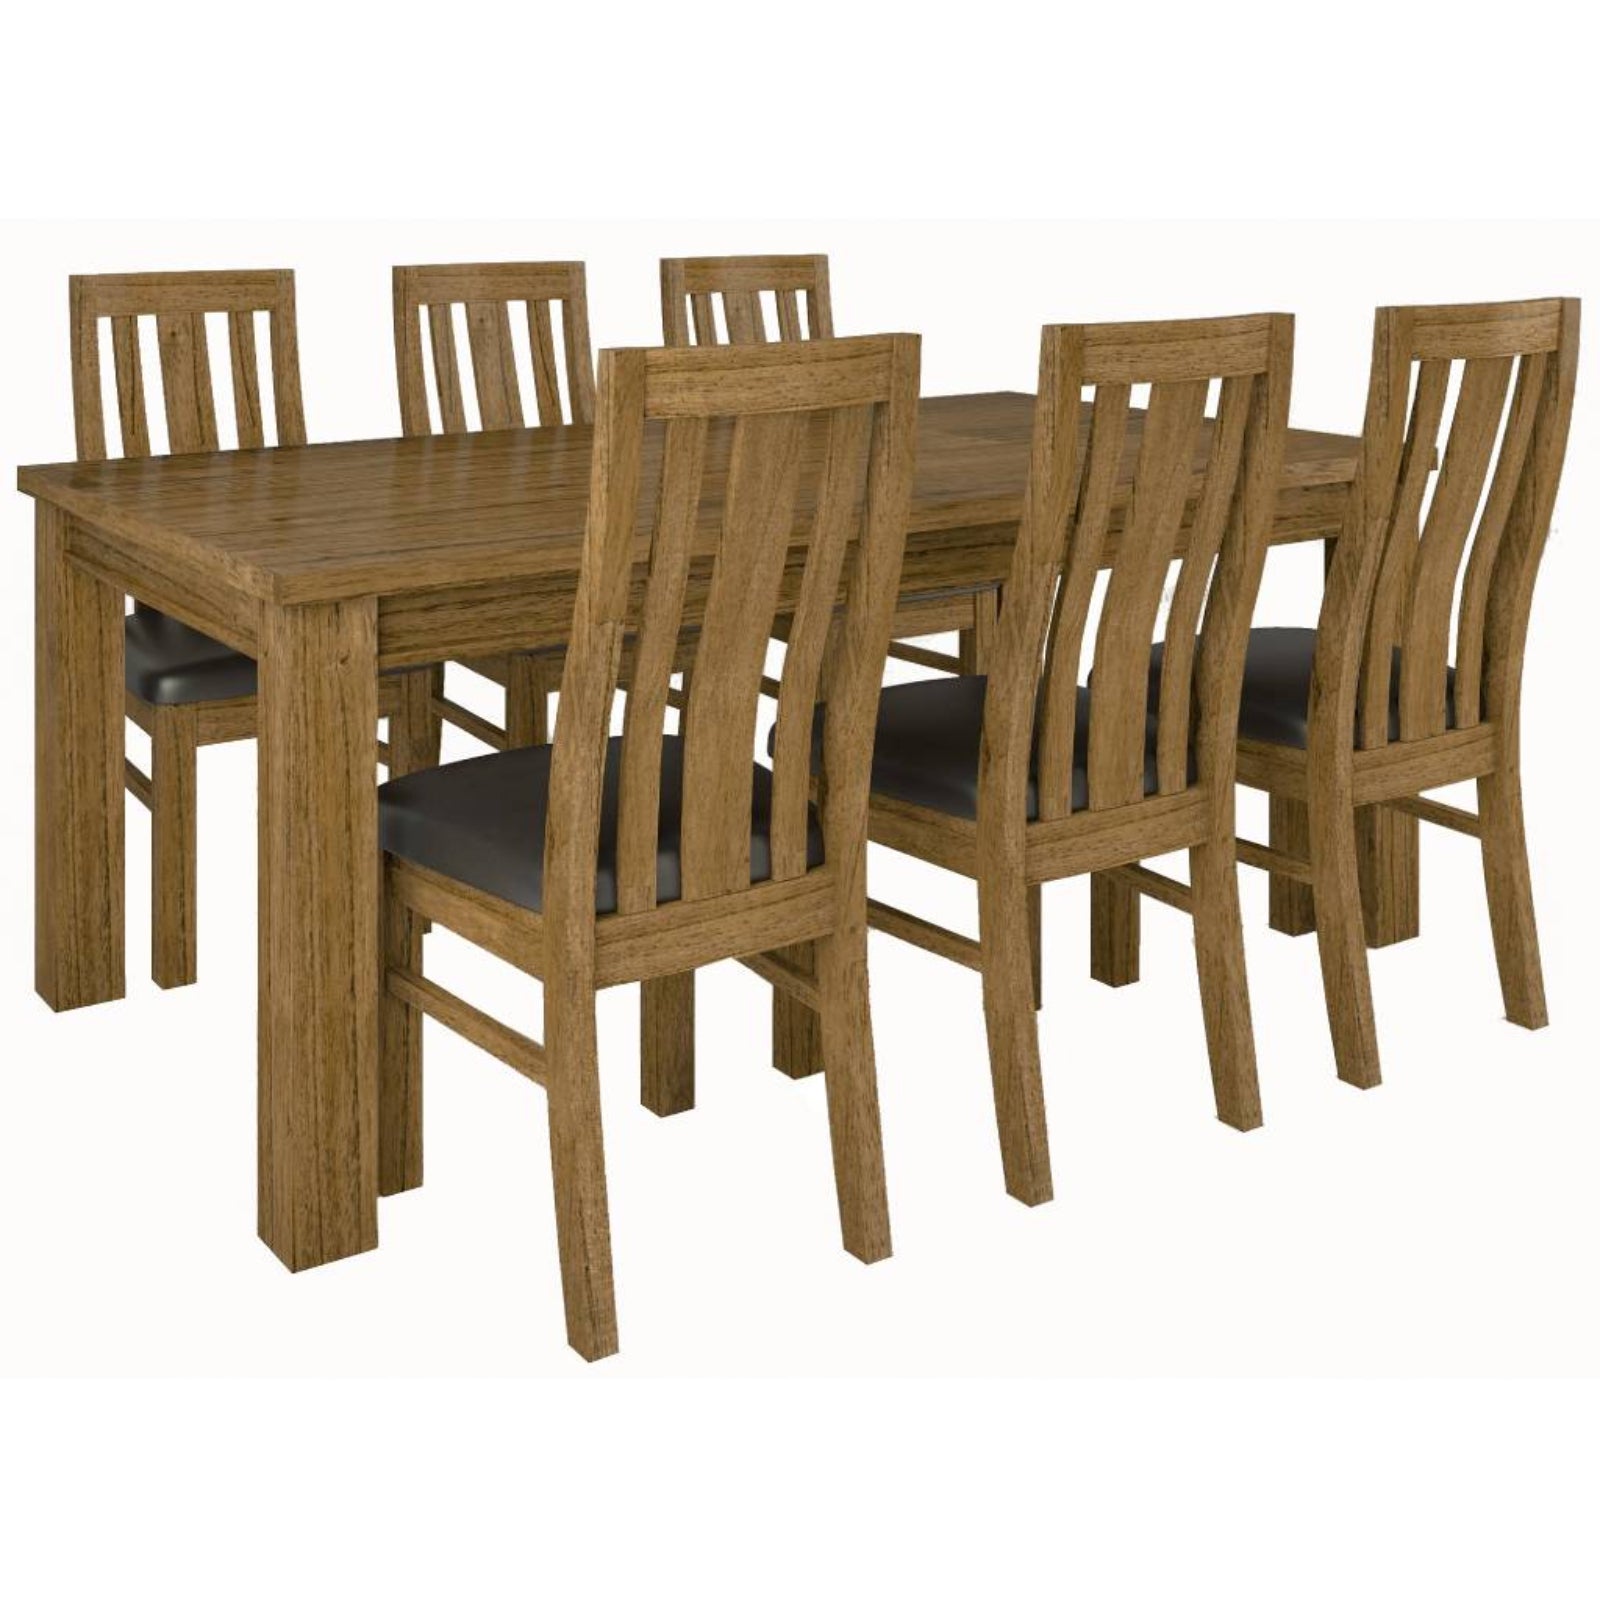 Birdsville 7pc Dining Set 190cm Table 6 PU Seat Chair Solid Mt Ash Wood - Brown - SILBERSHELL